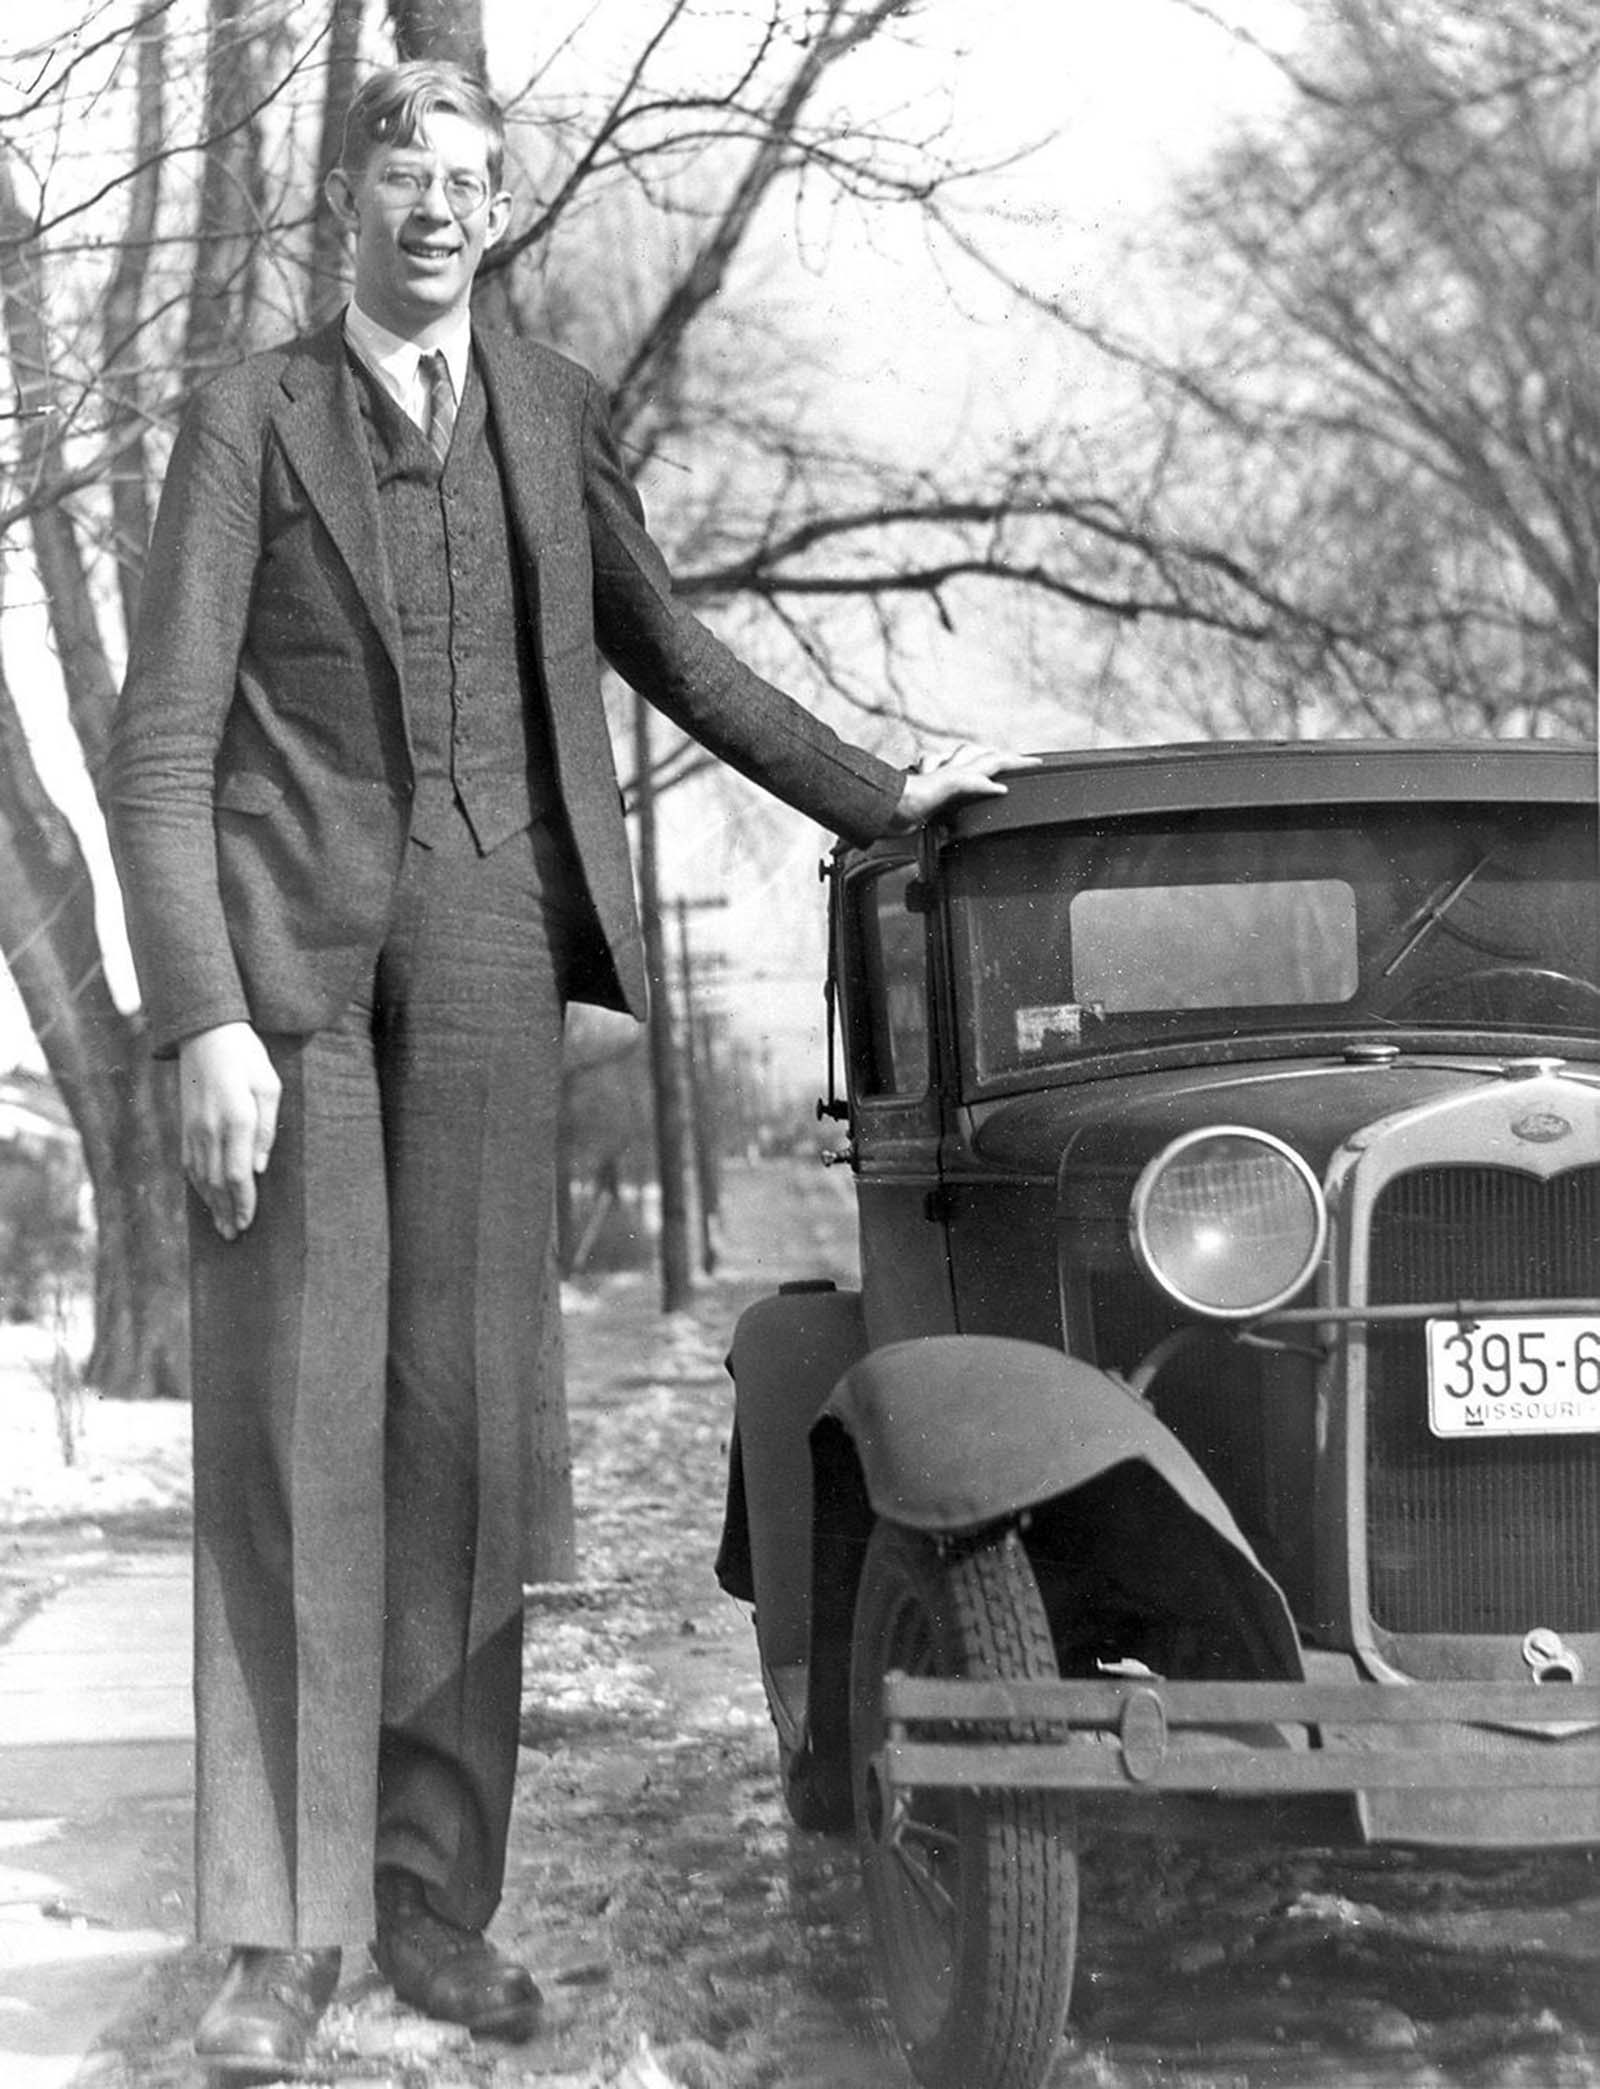 Robert Wadlow: Life Story and Photos of World's Tallest Man in History